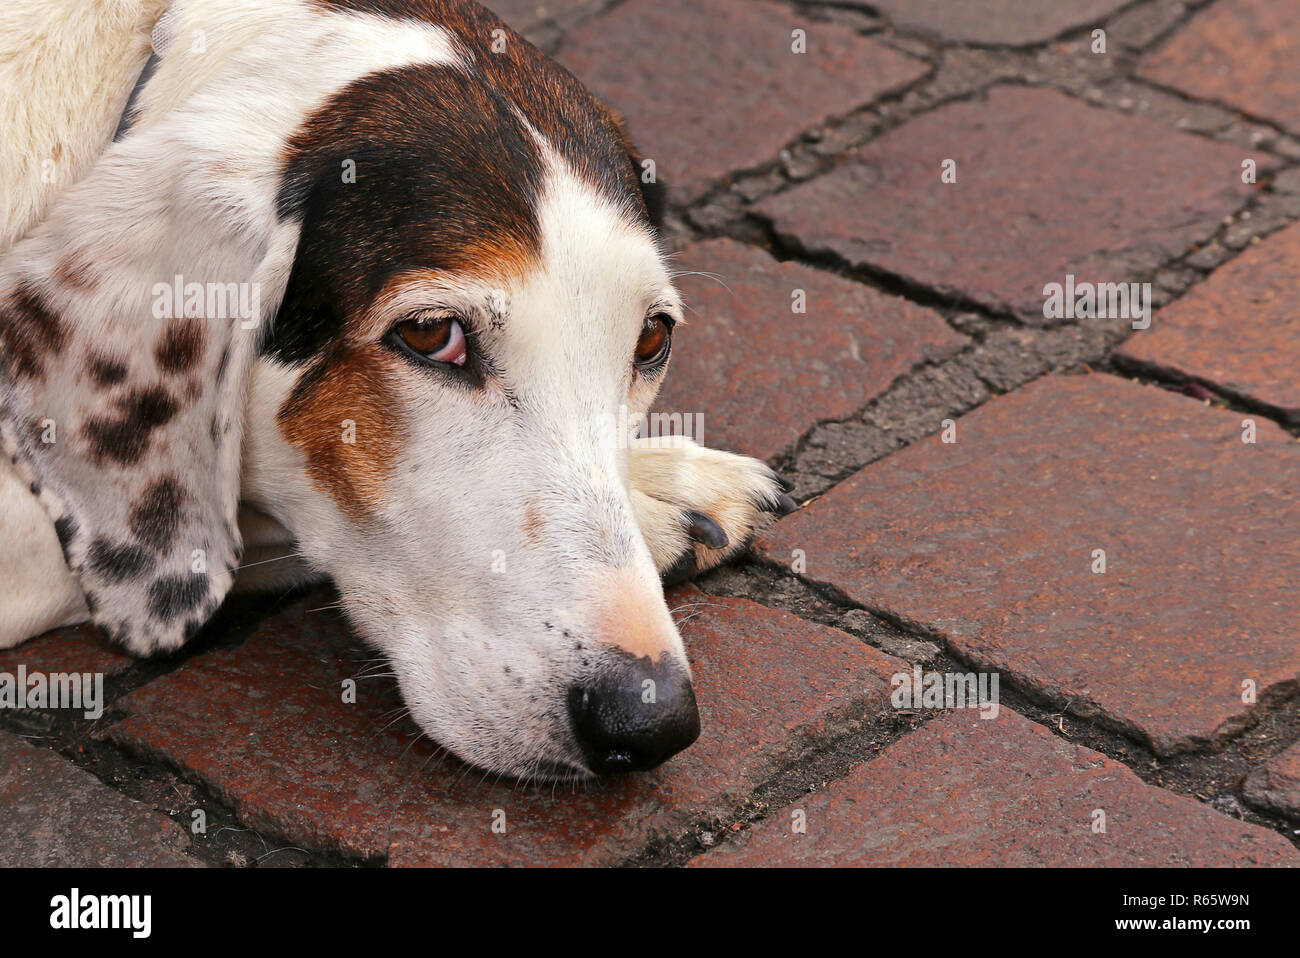 dog is resting on pavement Stock Photo